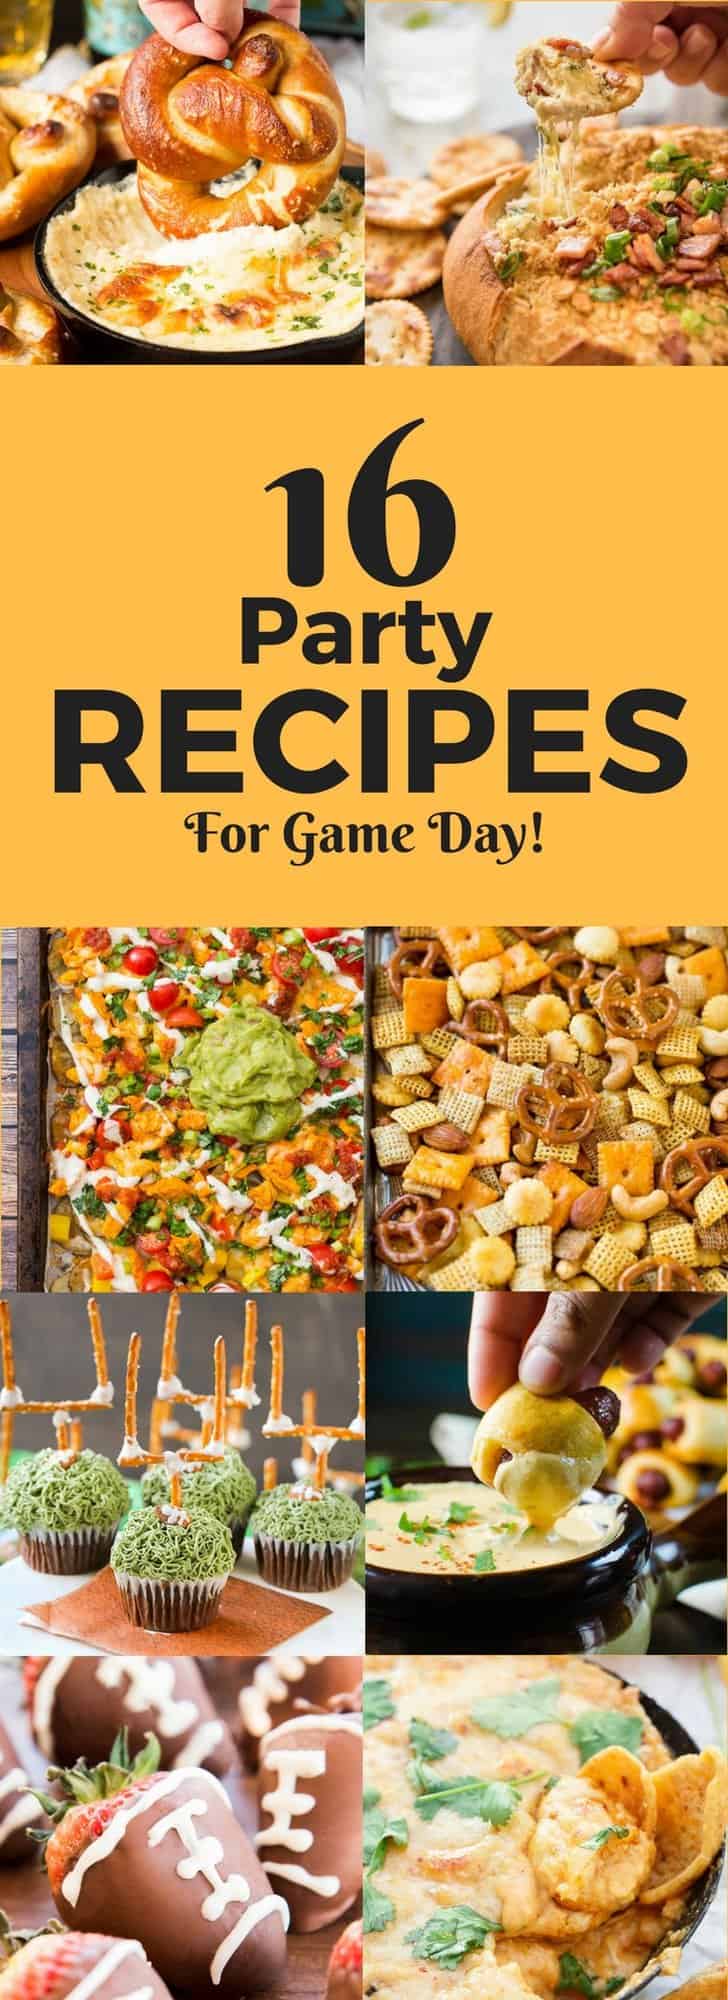 16 PARTY RECIPES FOR GAME DAY | Party appetizers | Football Party Food | Superbowl Appetizers